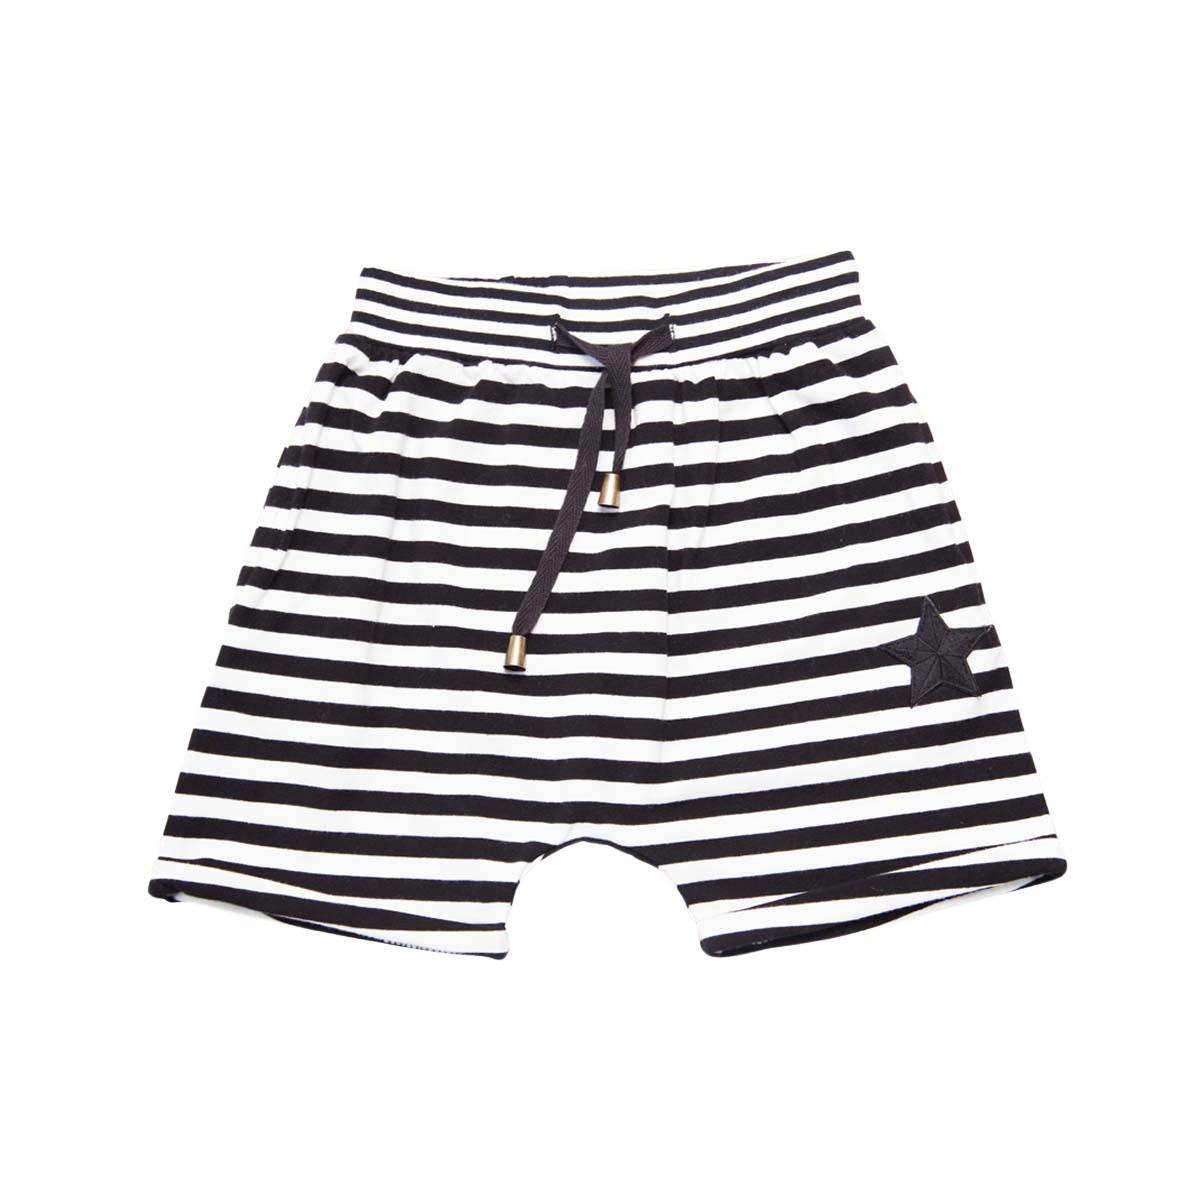 Black and white star and stripe shorts